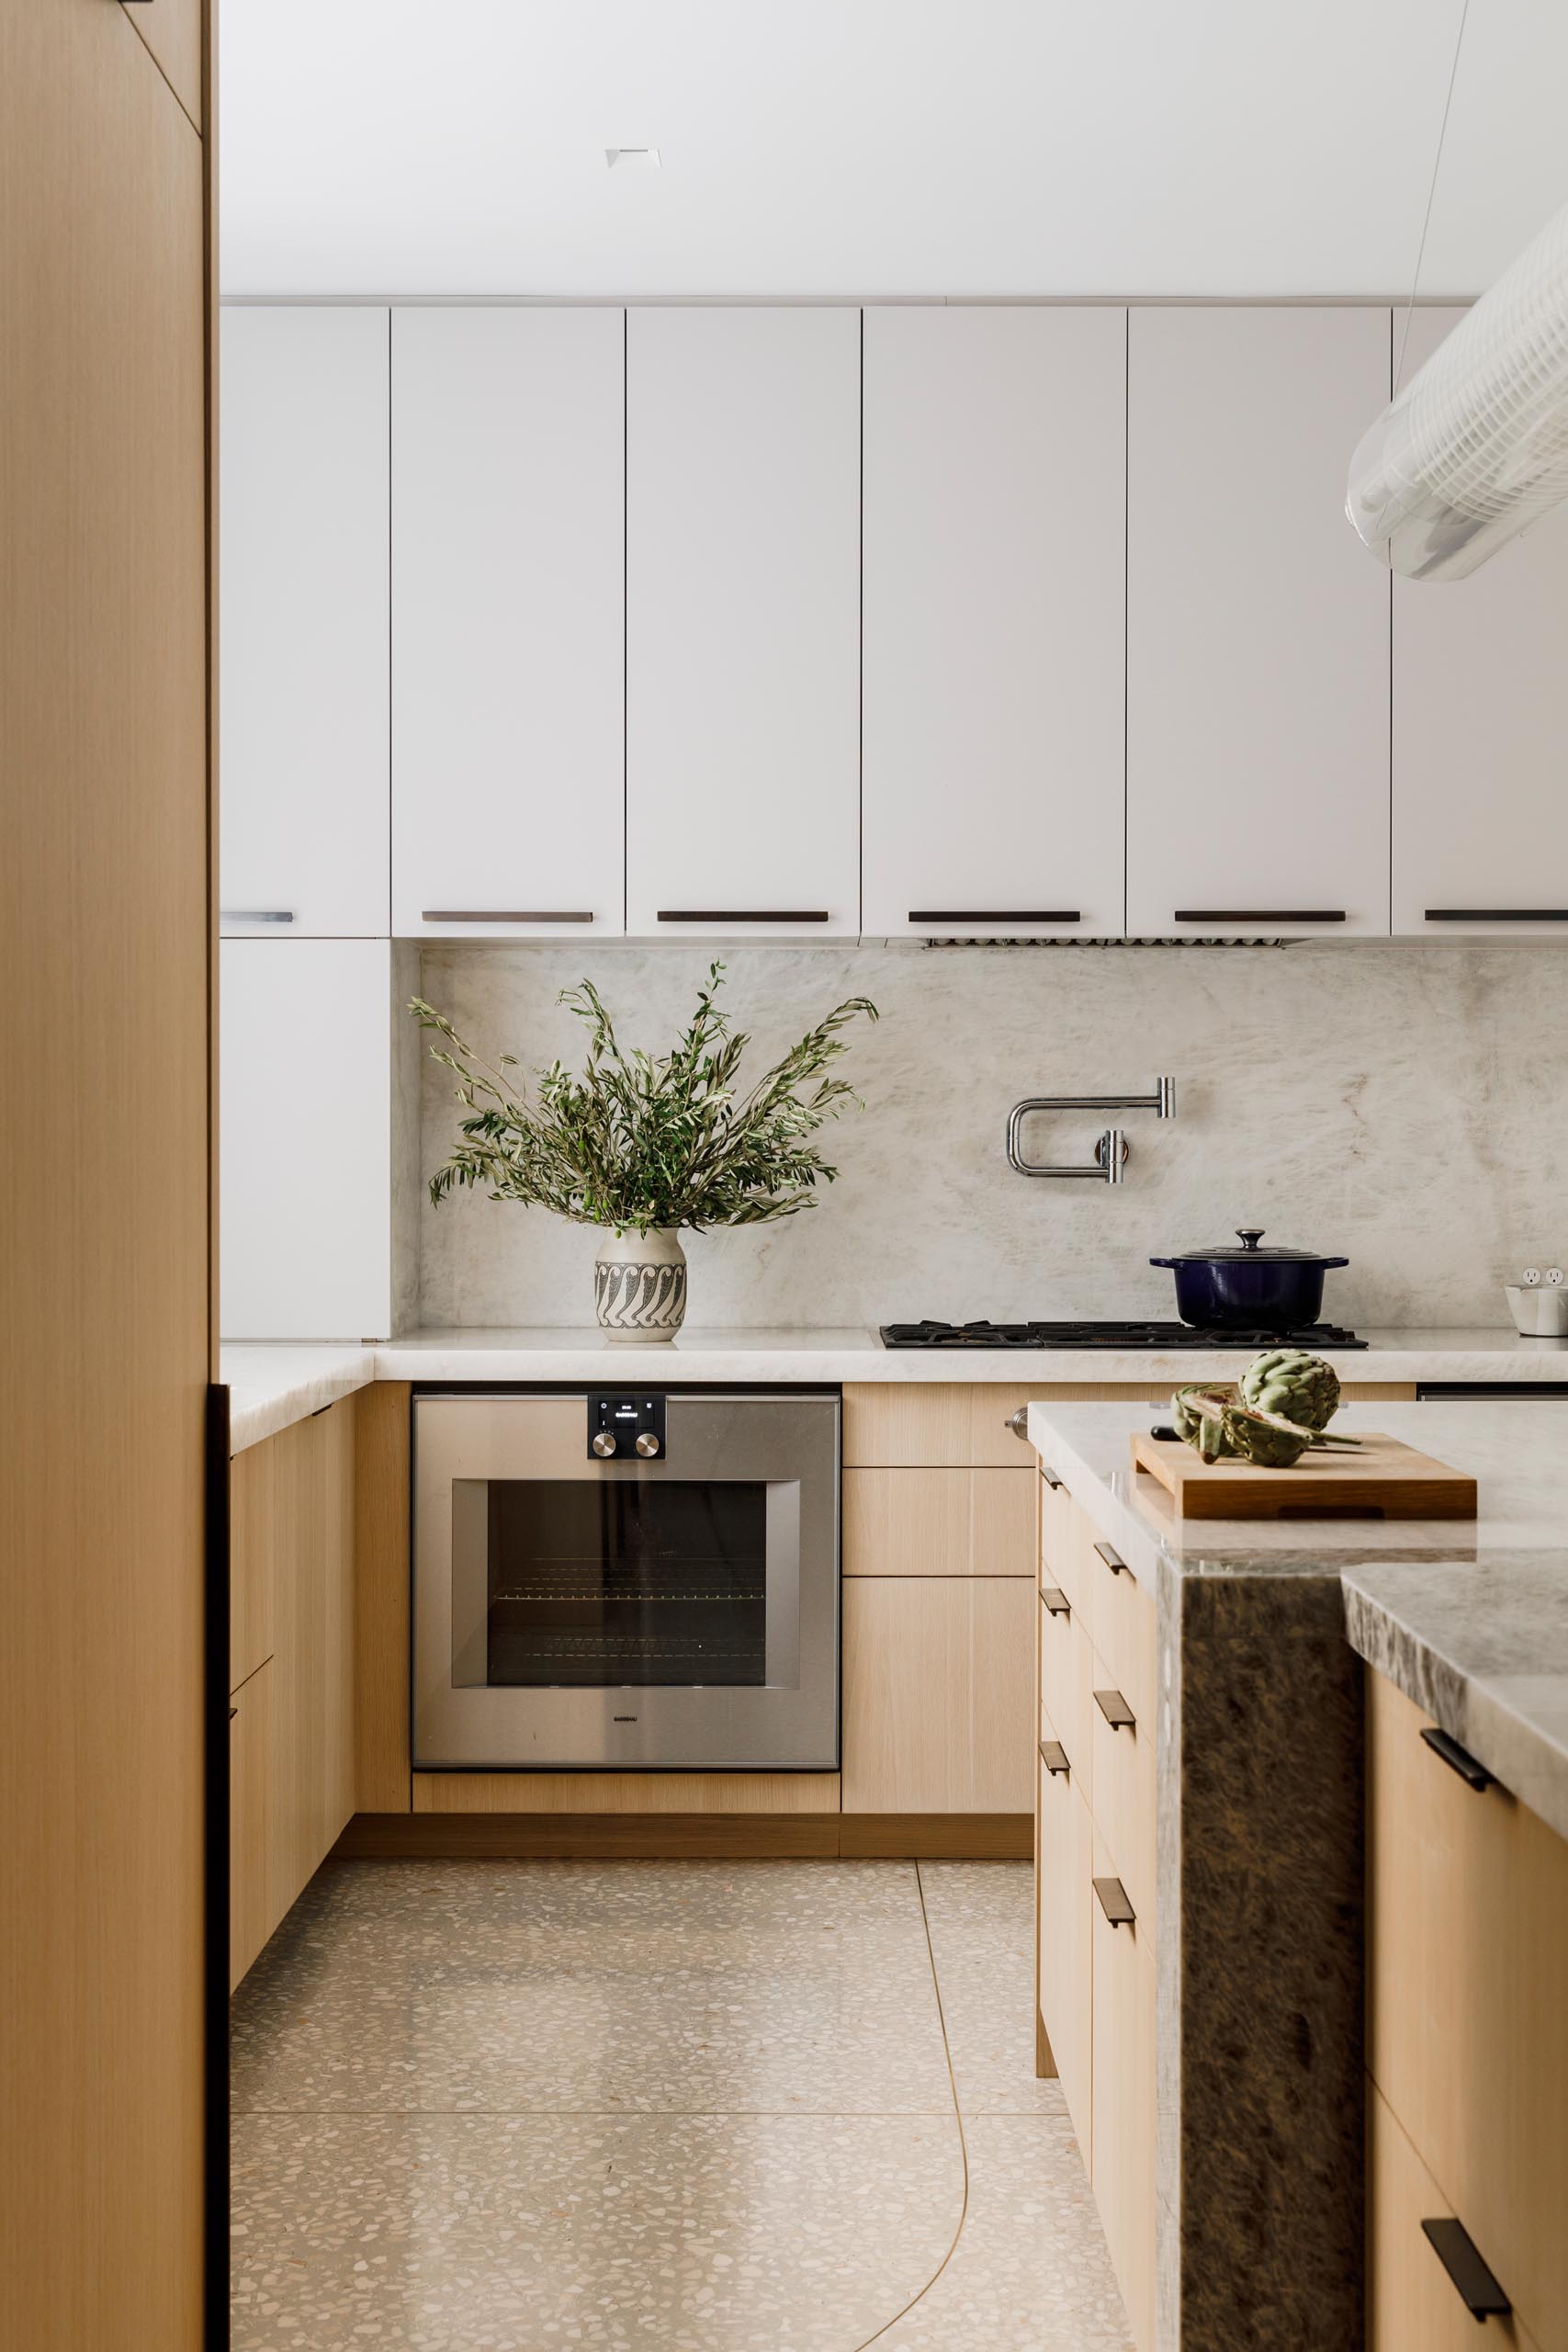 Within this modern kitchen there's cabinetry designed is by Henrybuilt, with additional customization by MKCA. The countertops are white Cristallo quartz and the floor is terrazzo.